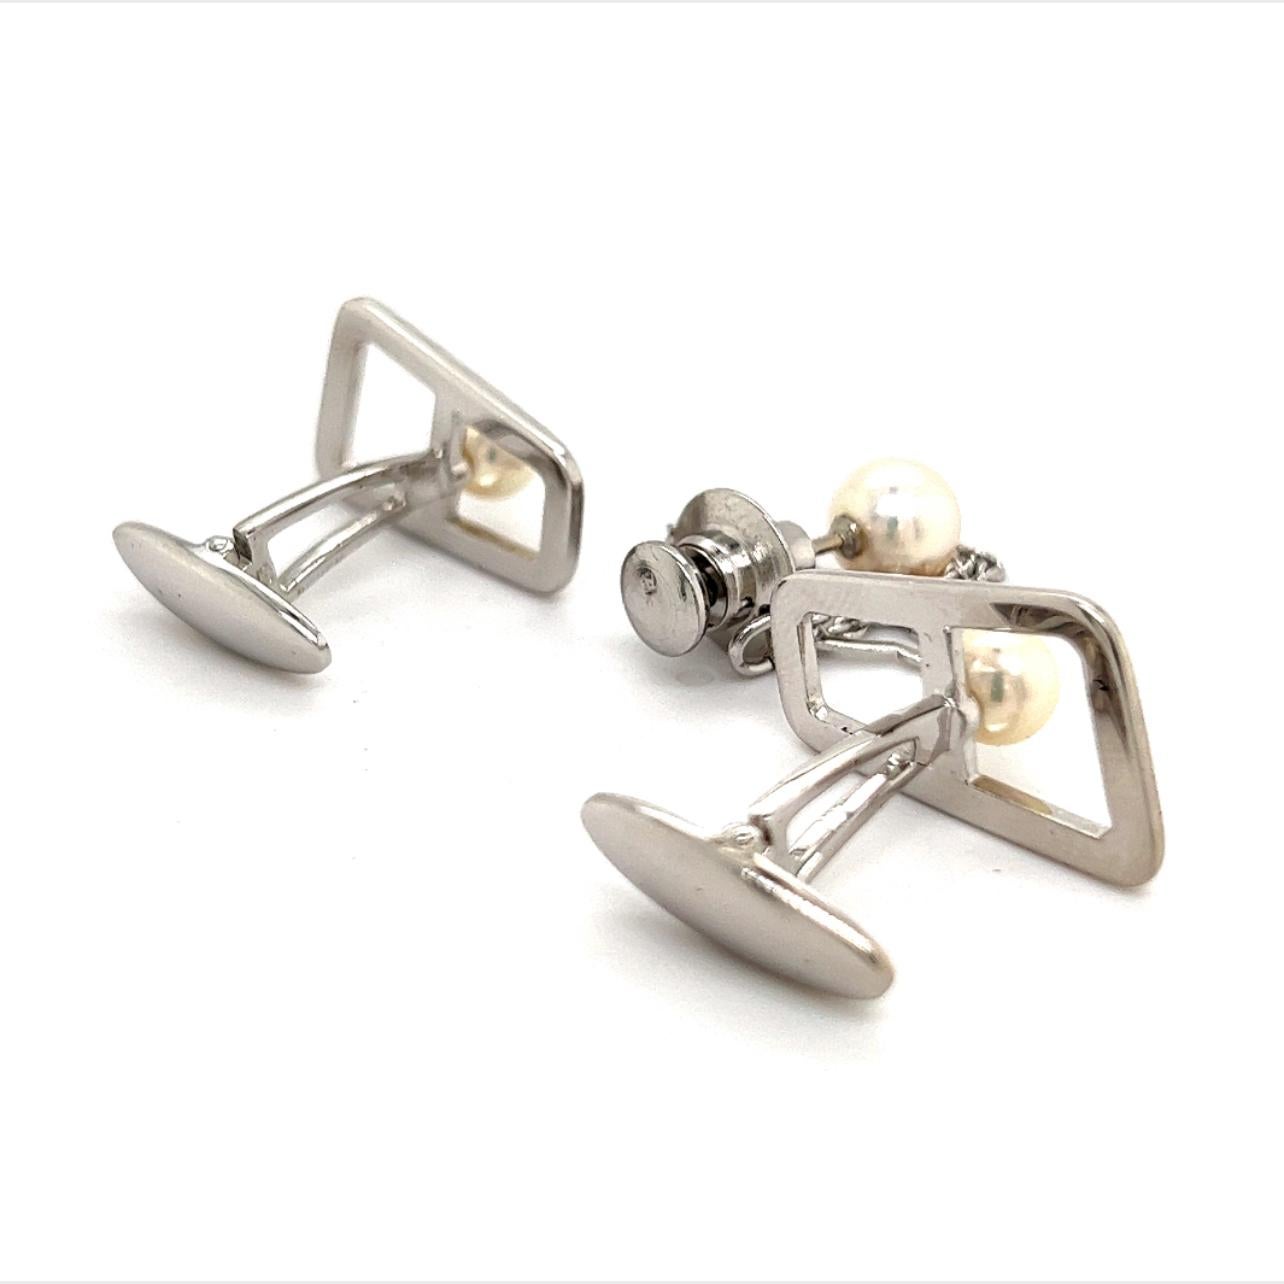 Mikimoto Estate Akoya Pearl Cufflinks and Tie Pin Sterling Silver 3